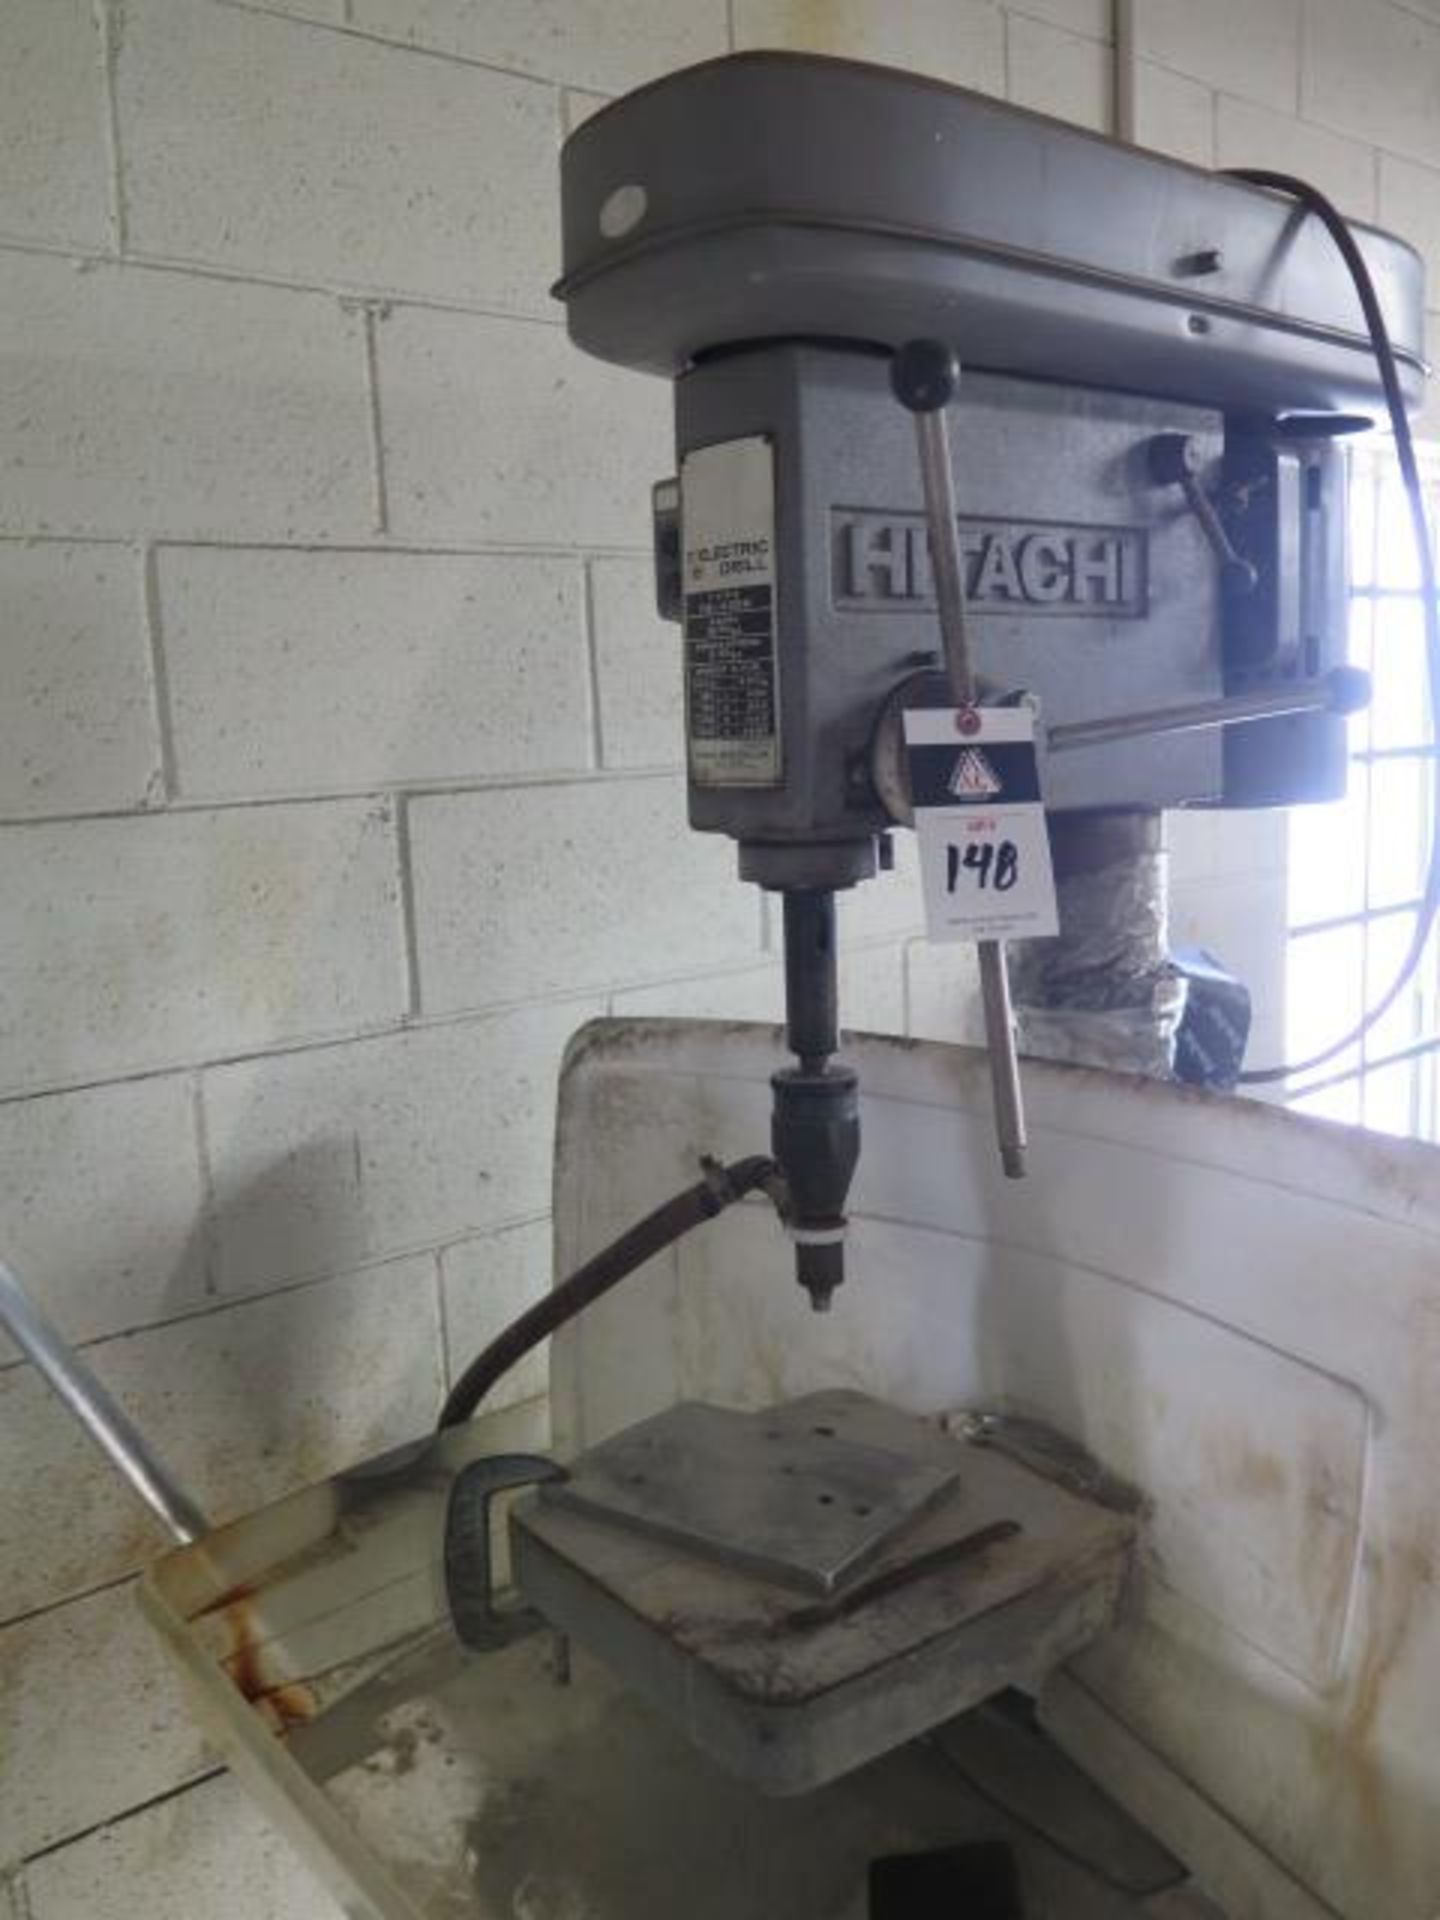 Hitachi Bench Model Drill Press w/ Custom Coolant Thru-Feed Attachment (SOLD AS-IS - NO WARRANTY) - Image 2 of 5